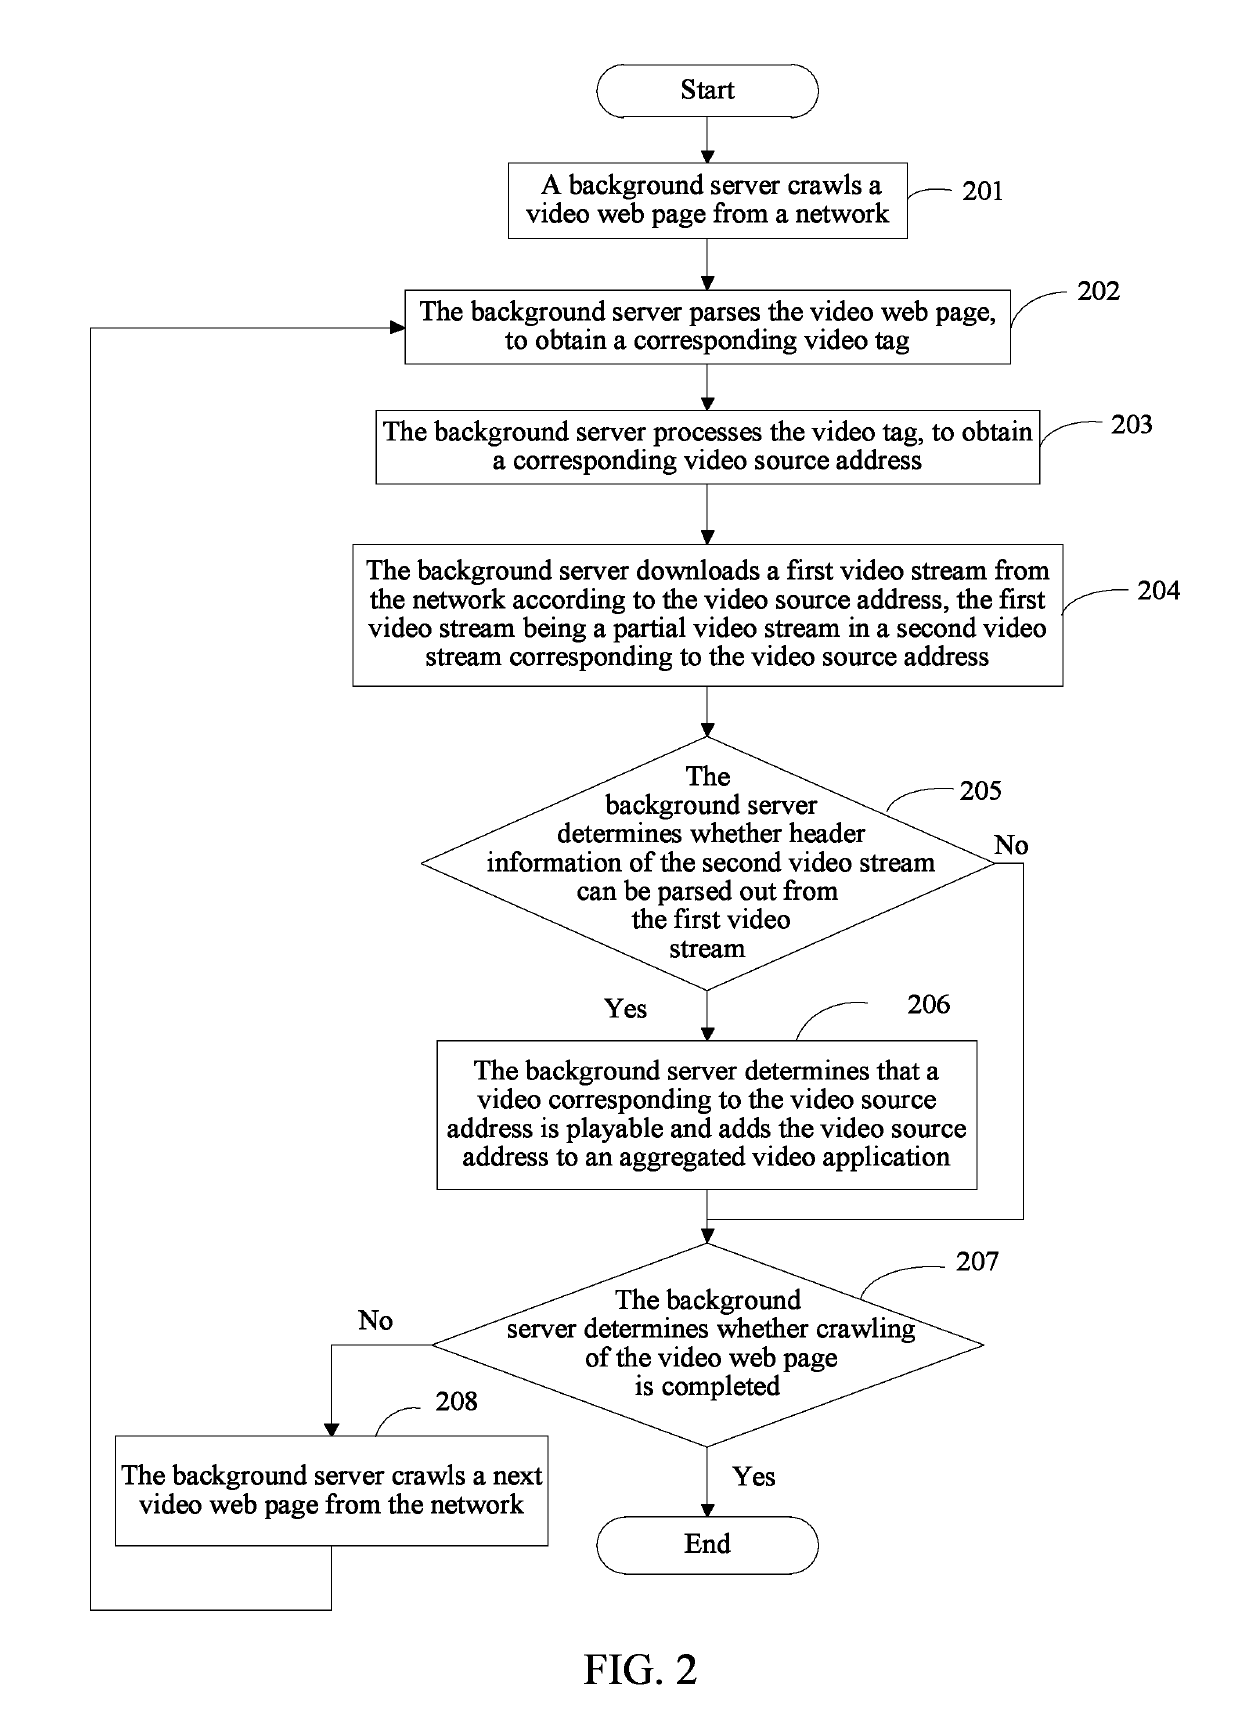 Method and apparatus for detecting video playability